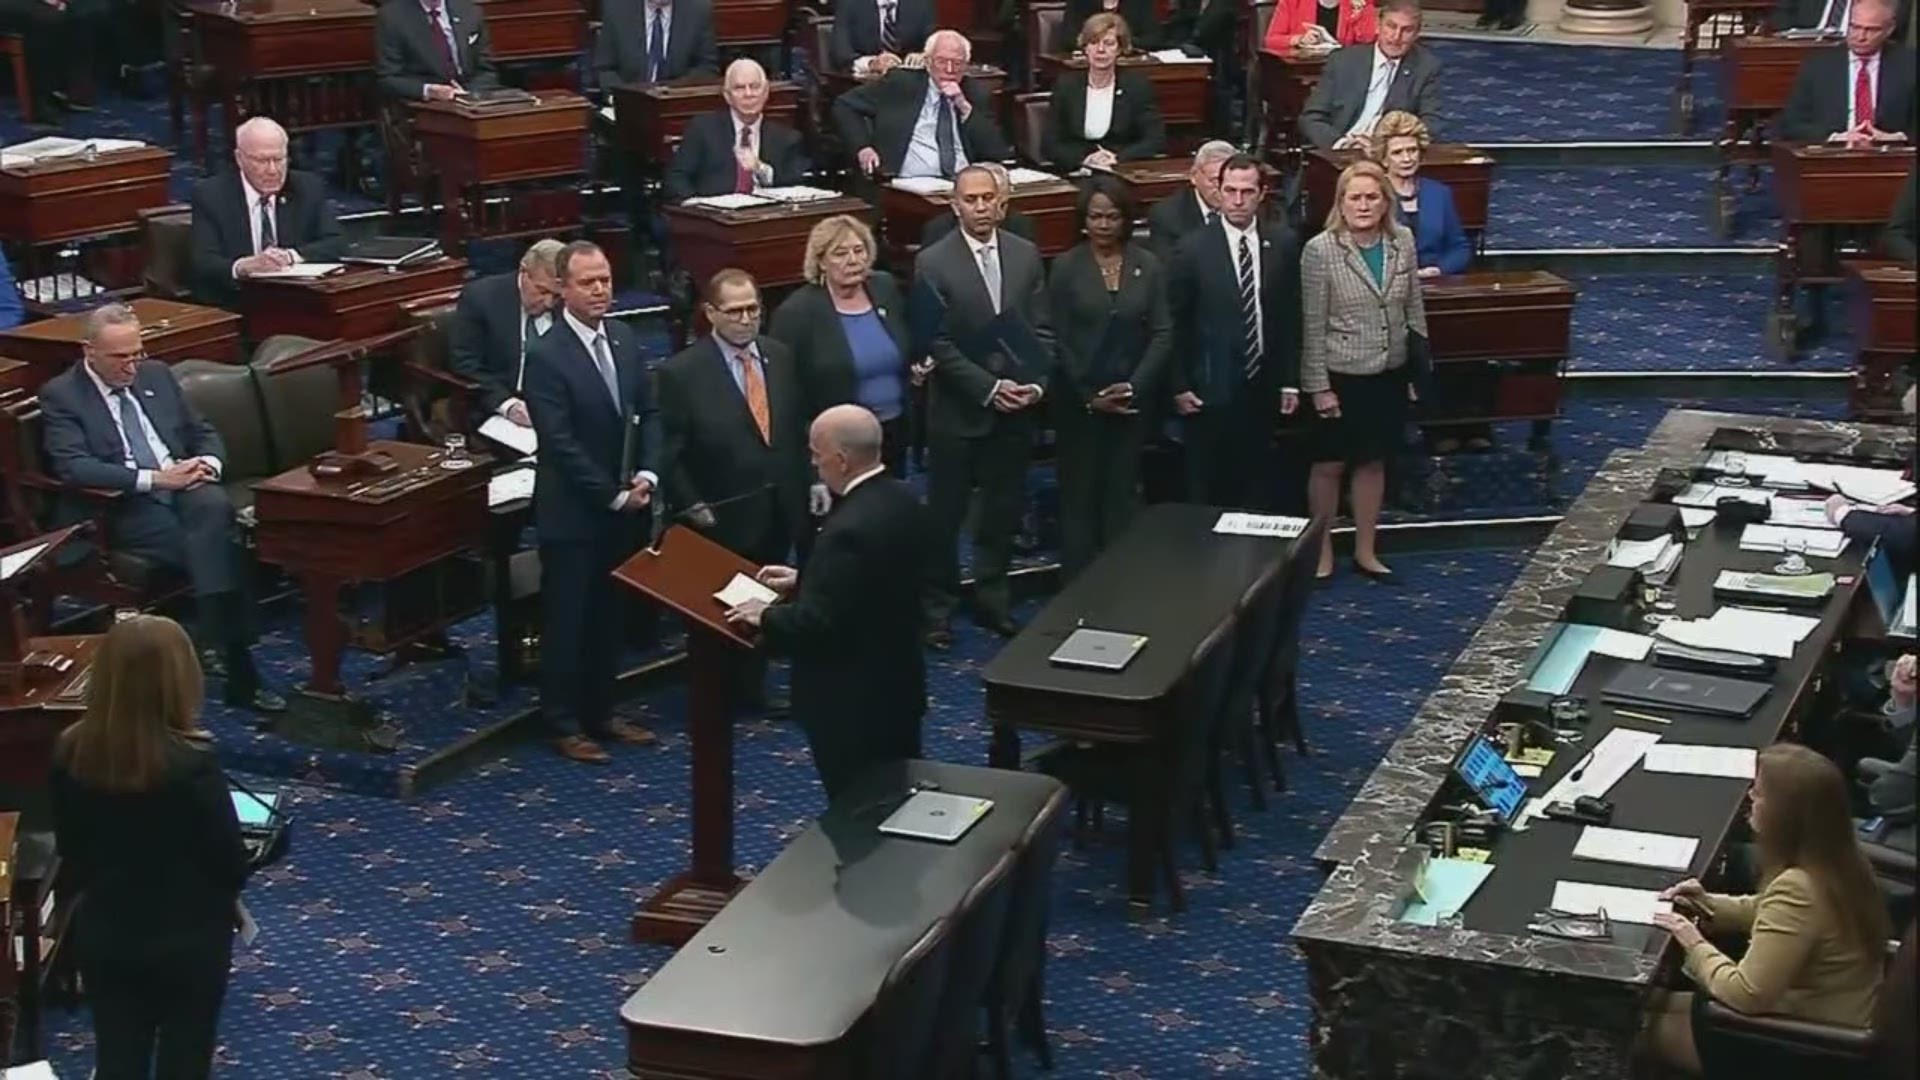 The solemn procession began with House Impeachment Managers making their way into the Senate Chamber. The House prosecutors read the charges against President Trump.